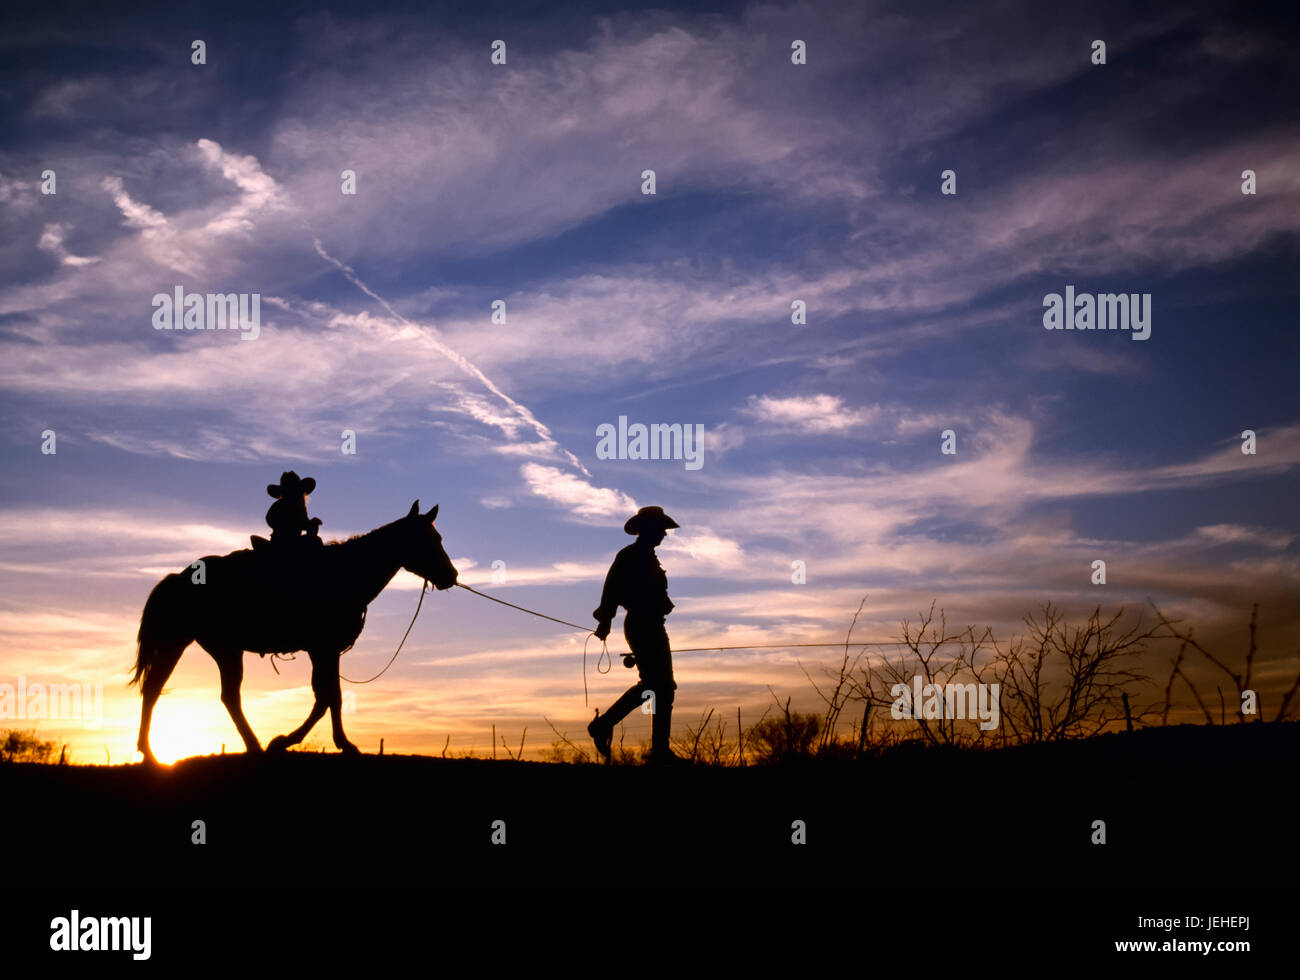 Agriculture - A cowboy leads his young daughter on a horse at sundown while carrying a fishing pole / Childress, Texas, USA. Stock Photo